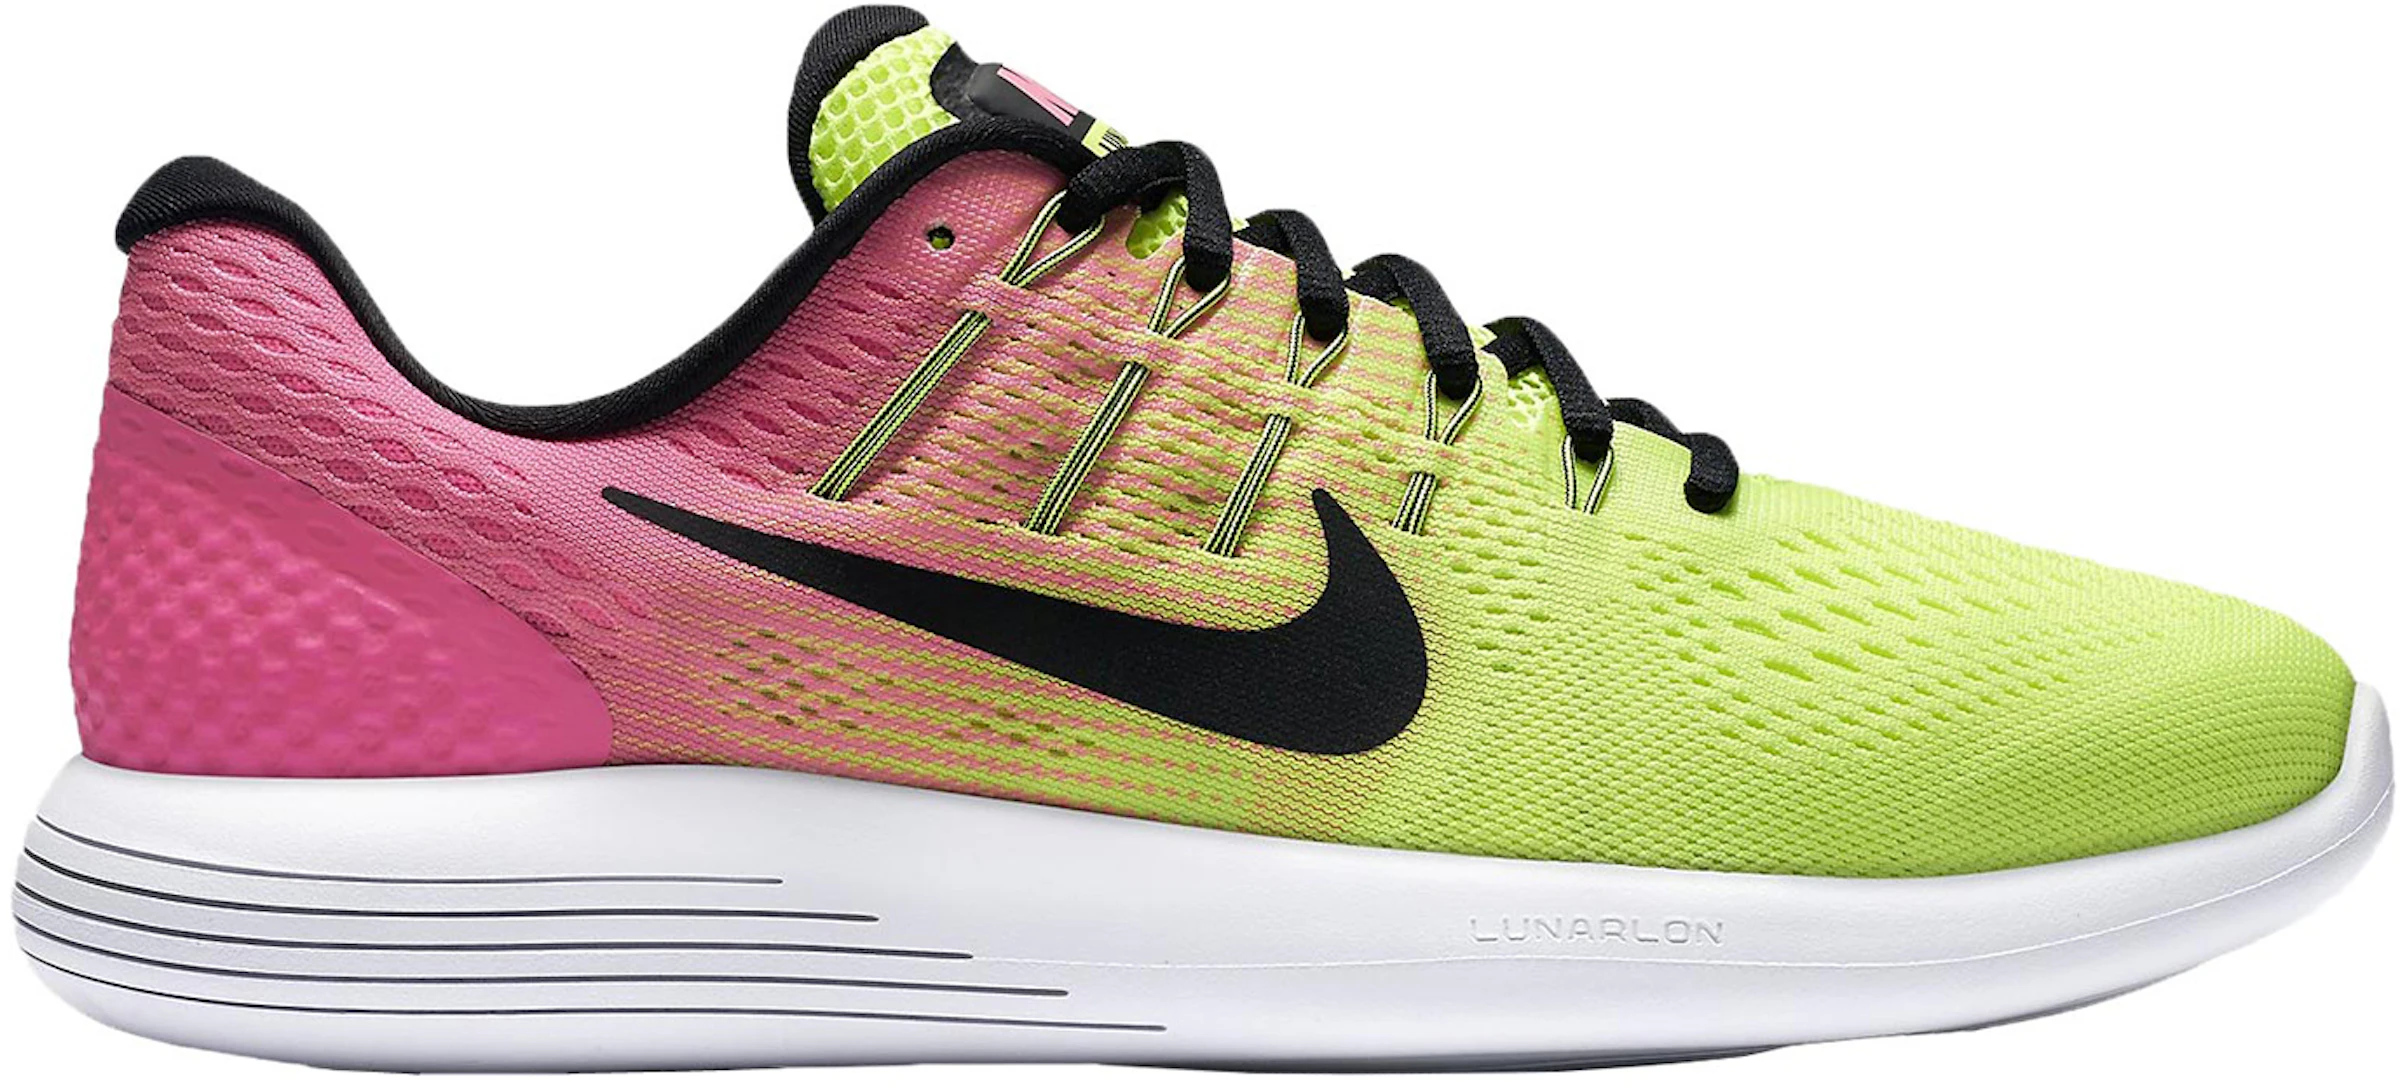 Nike Lunarglide 8 OC Unlimited Olympic Collection 844632-999 - ES